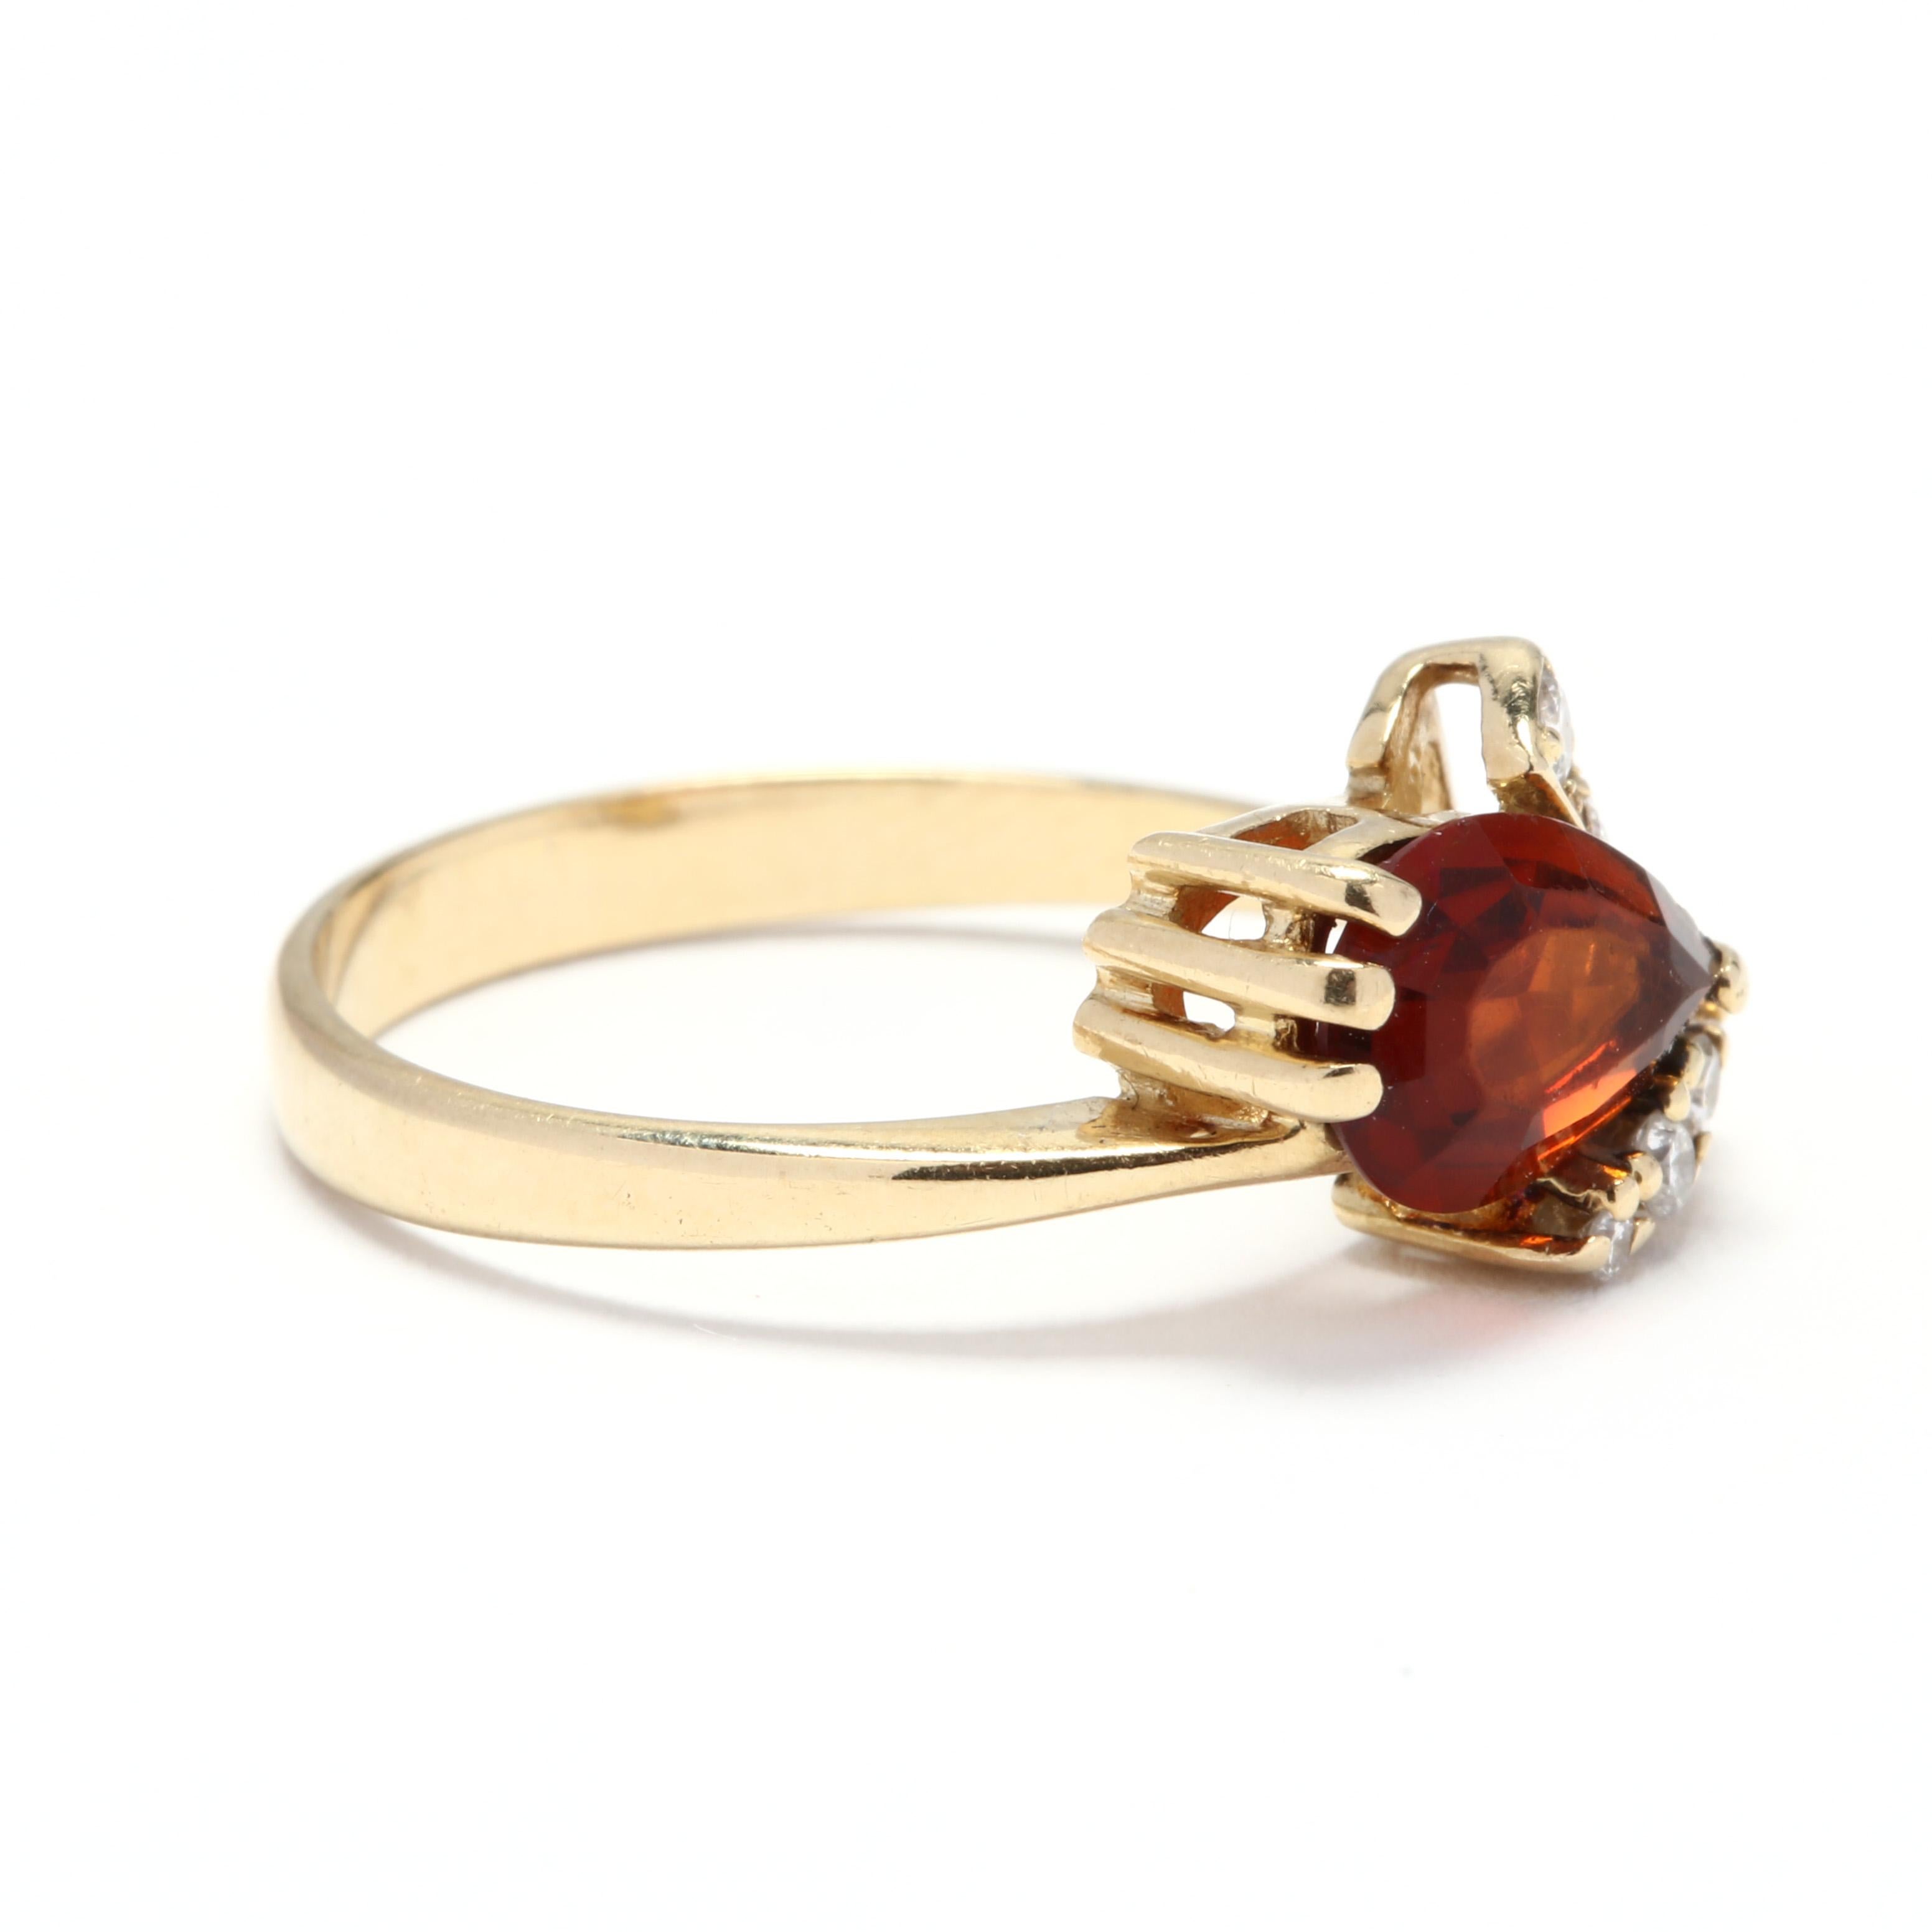 A 14 karat yellow gold, madeira citrine and diamond ring. This ring features a horizontal, prong set pear shape madeira citrine with a V shape detail set with full cut round diamonds weighing approximately .11 total carats and a thin